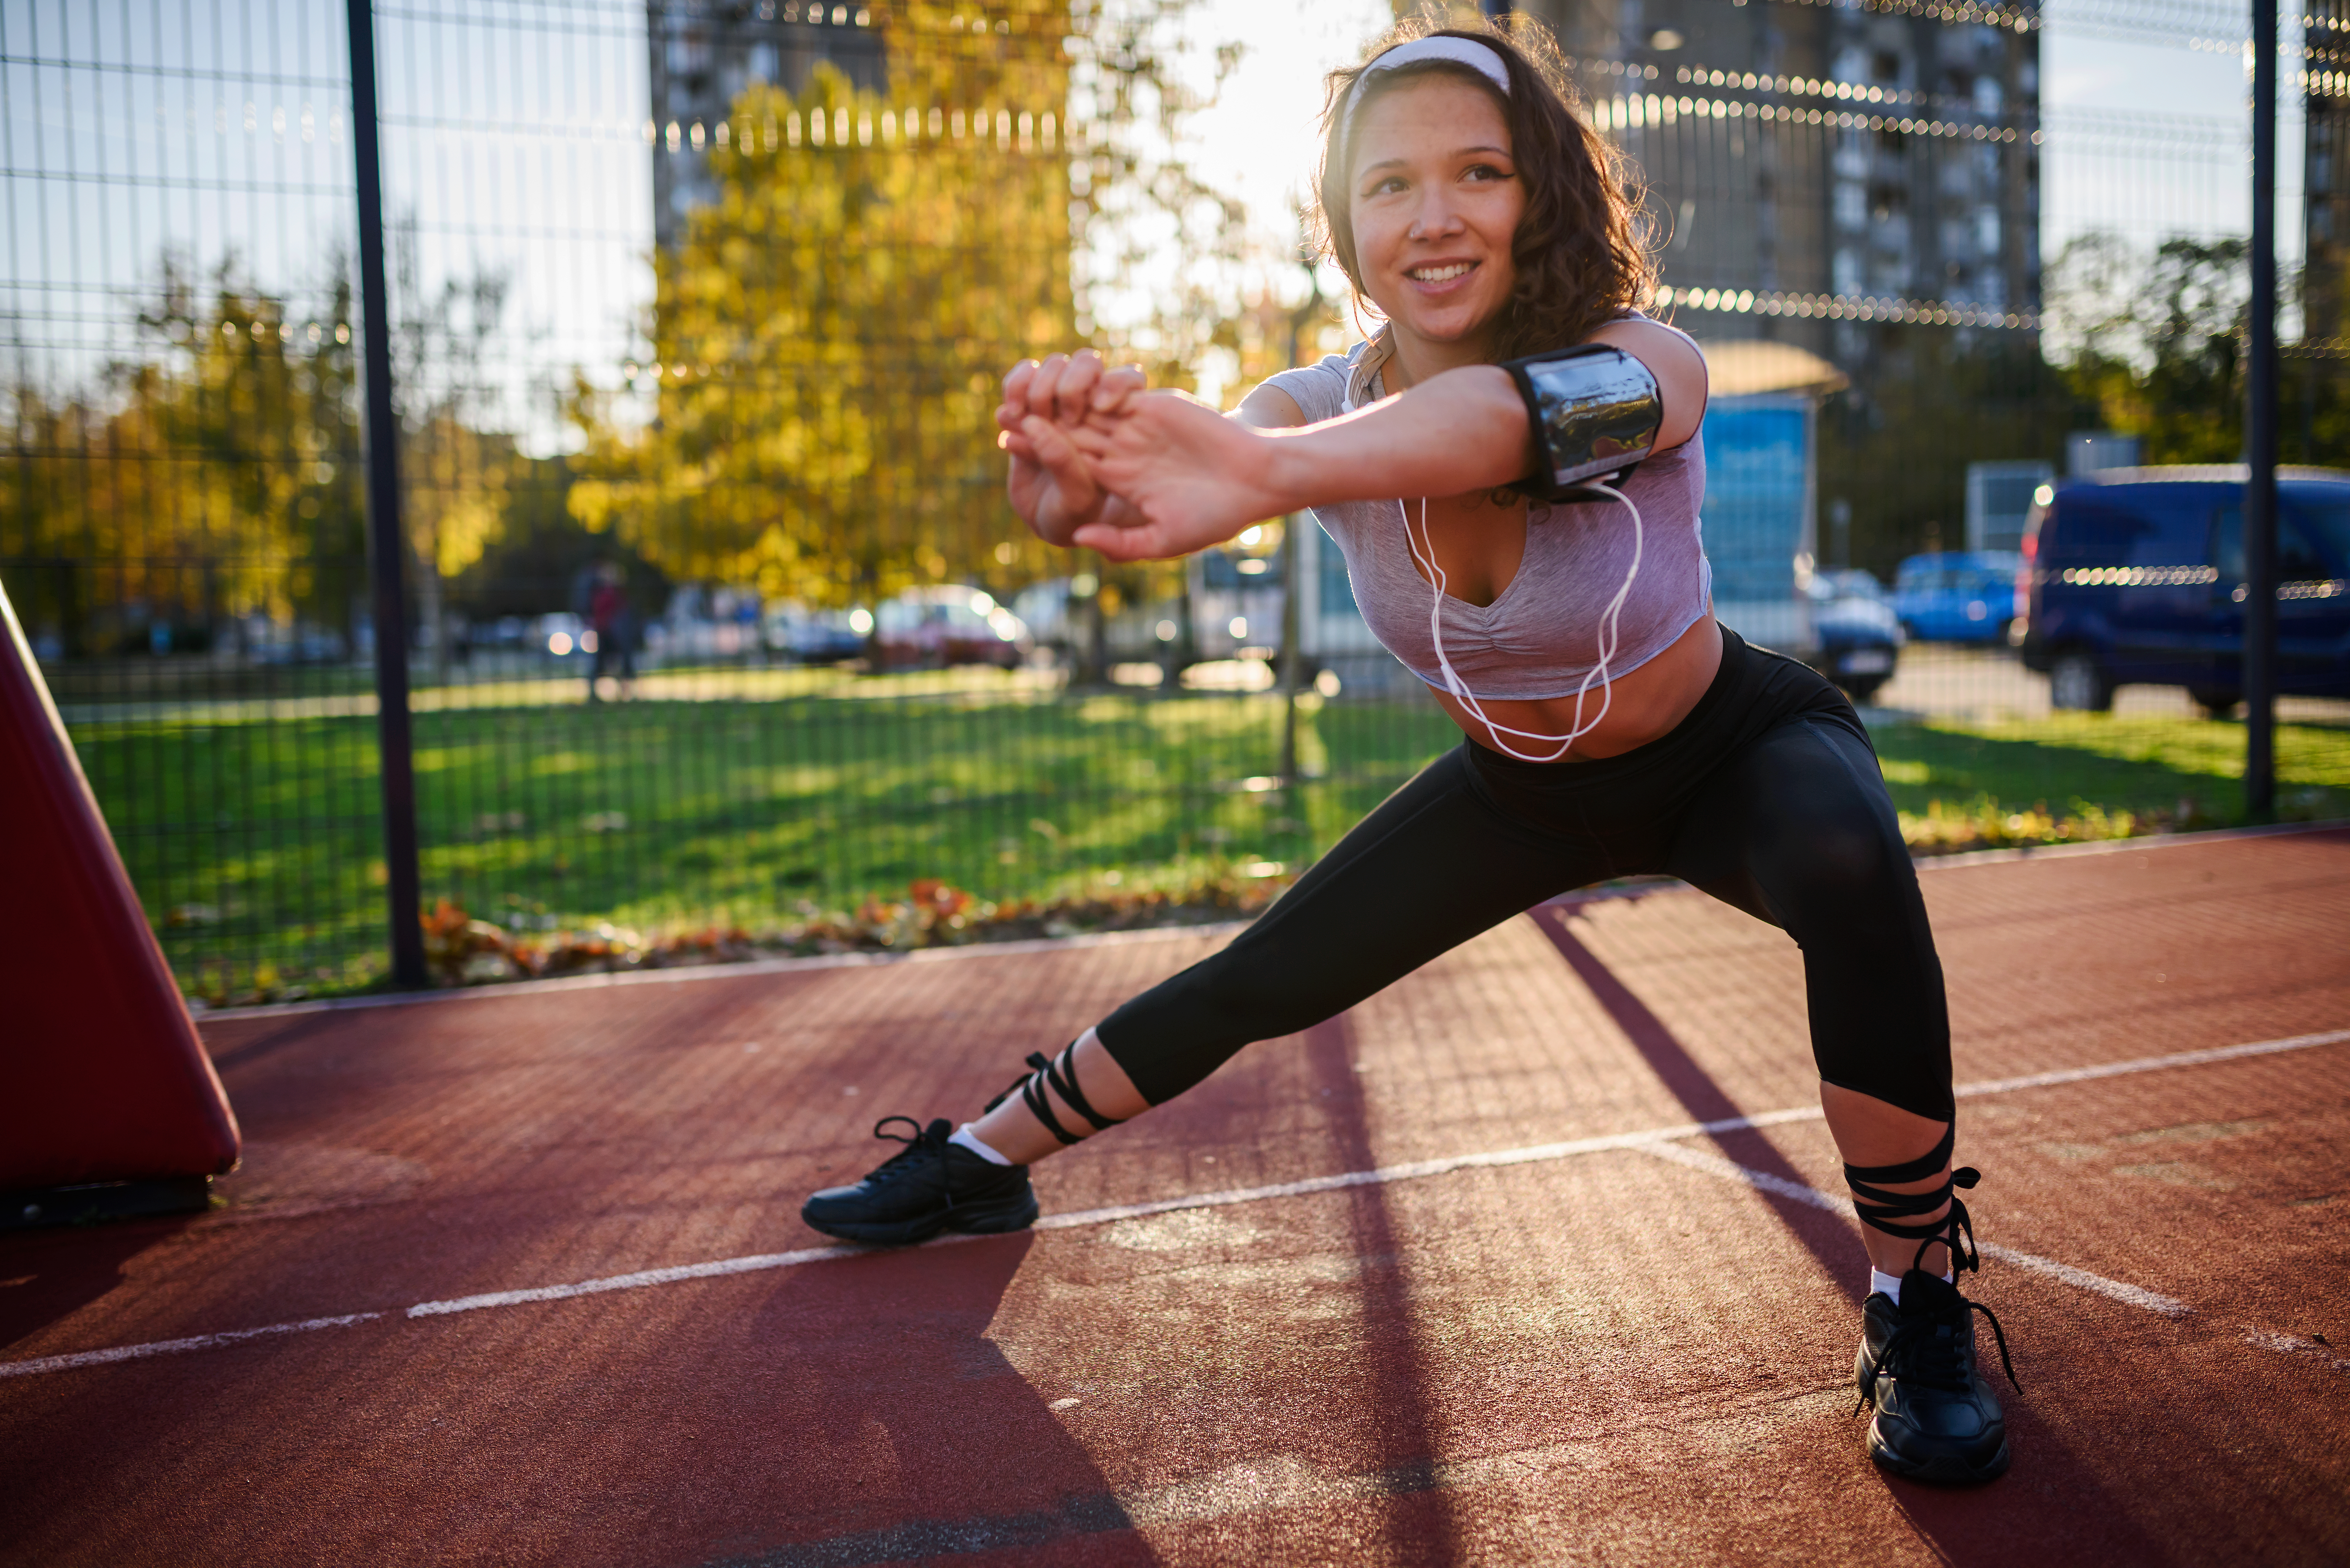 Girl doing a side squat at a running field during sunset